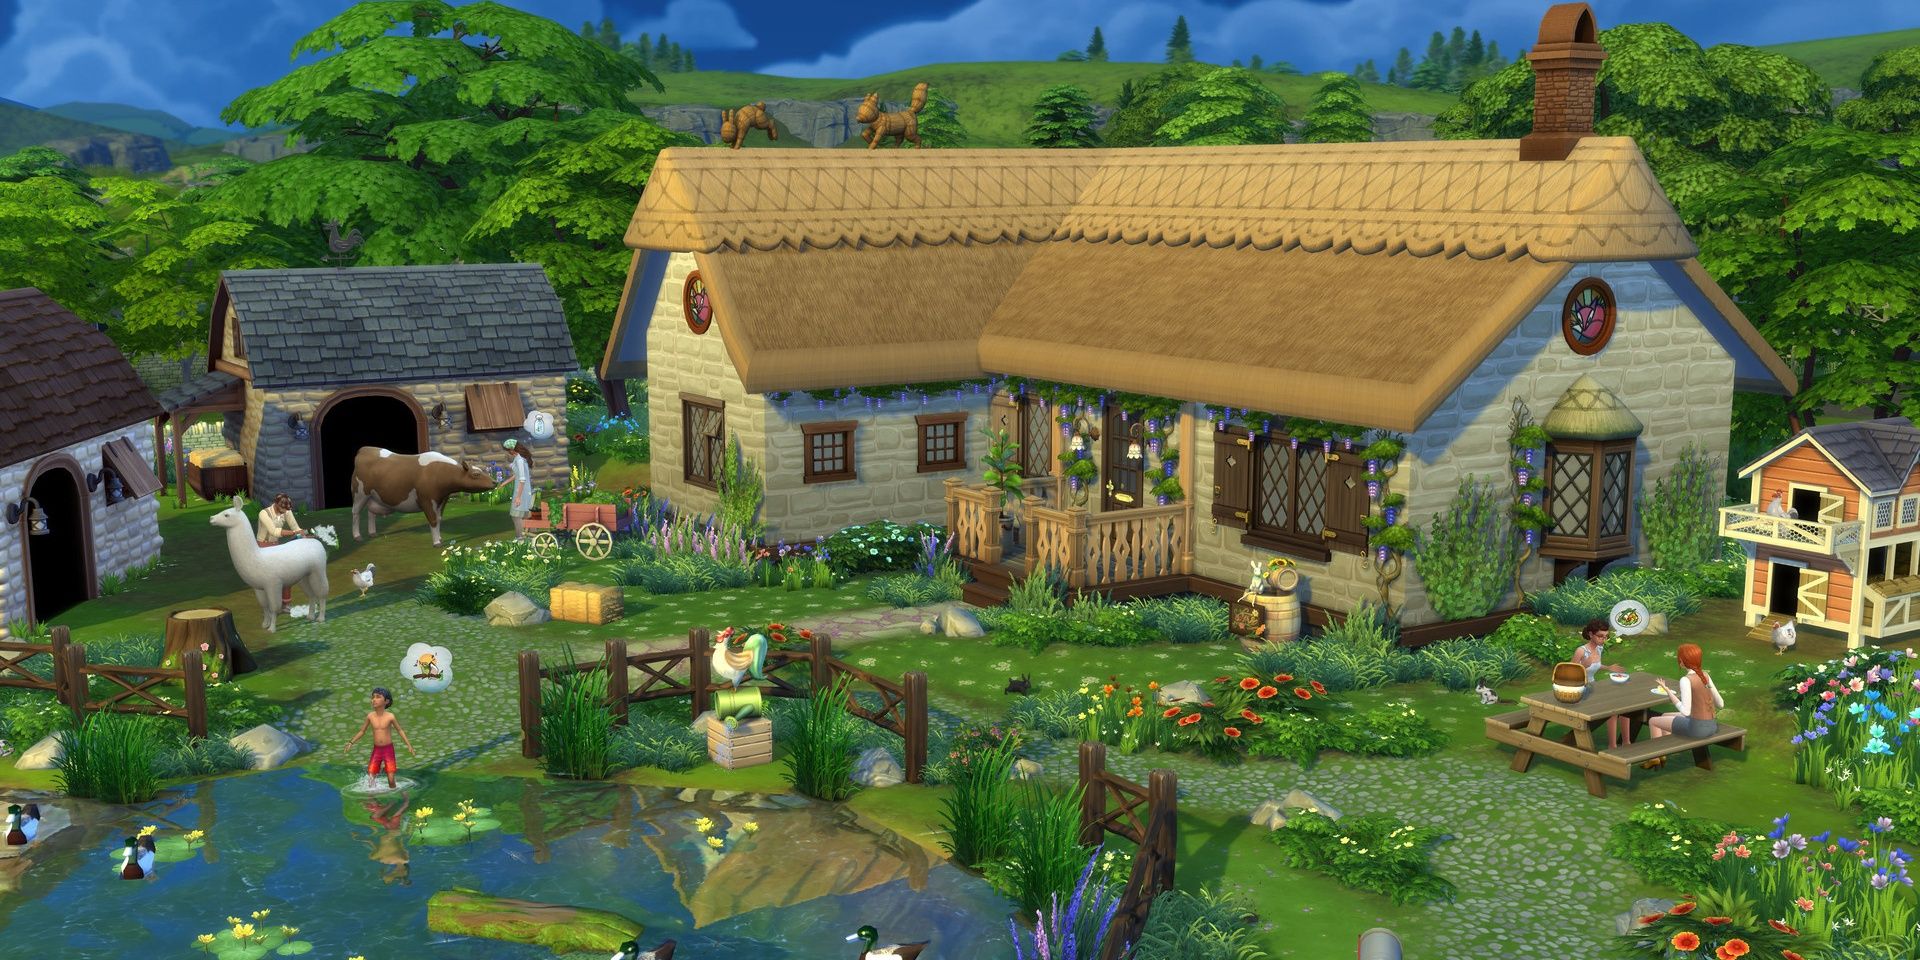 A cottage house in The Sims 4